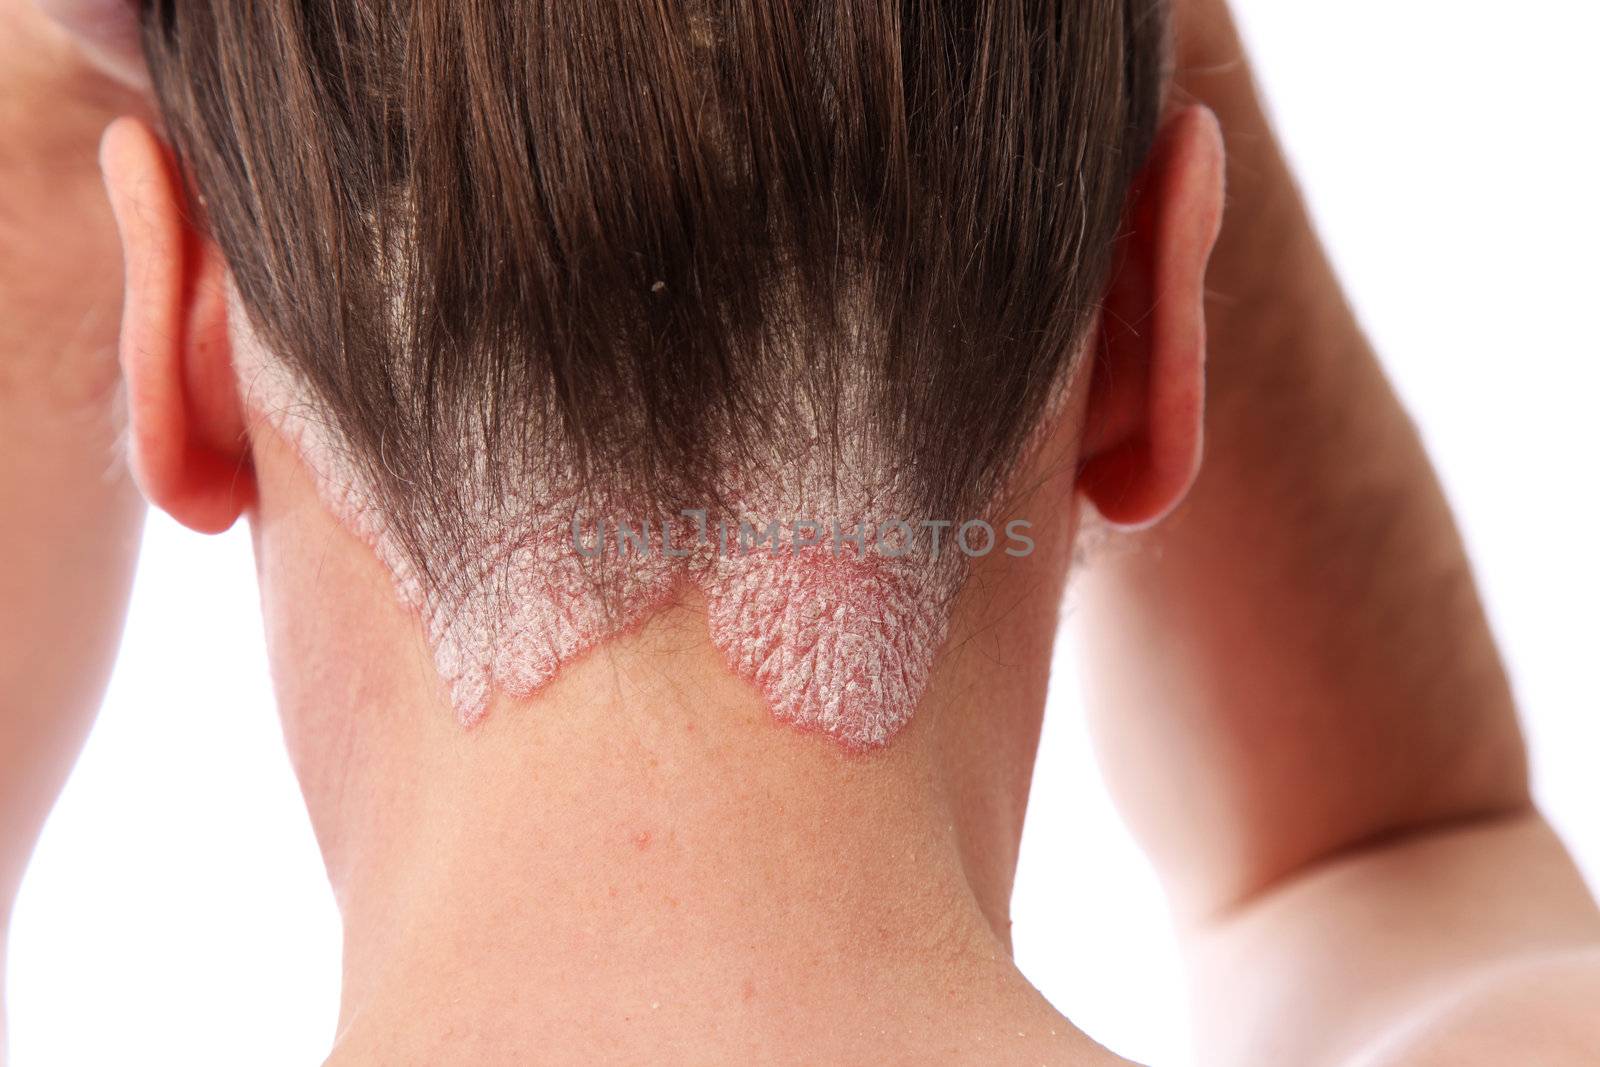 psoriasis on the hairline and on the scalp by Farina6000